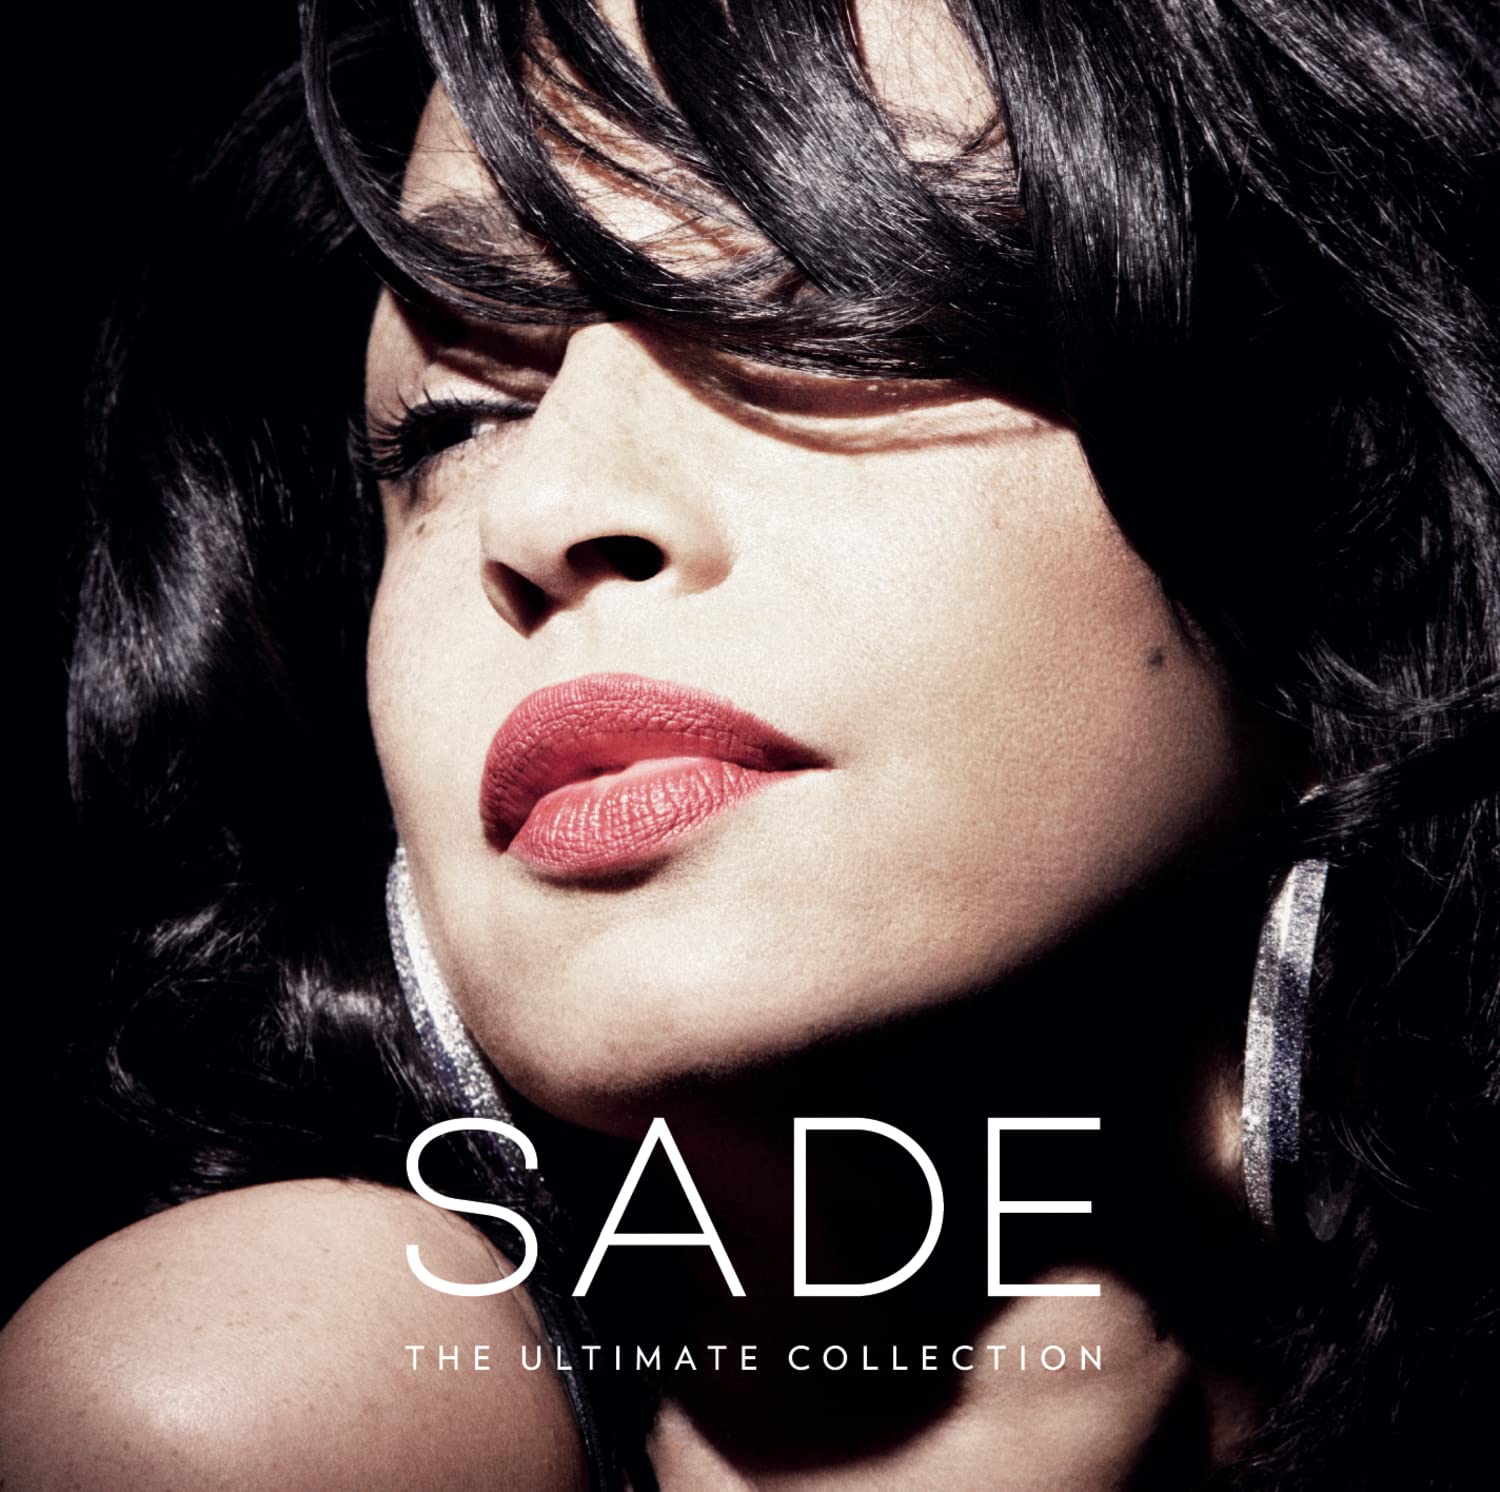 SADE - THE ULTIMATE COLL. 2CD 29 CLASSIC TRACKS + 3 BRAND NEW SONG